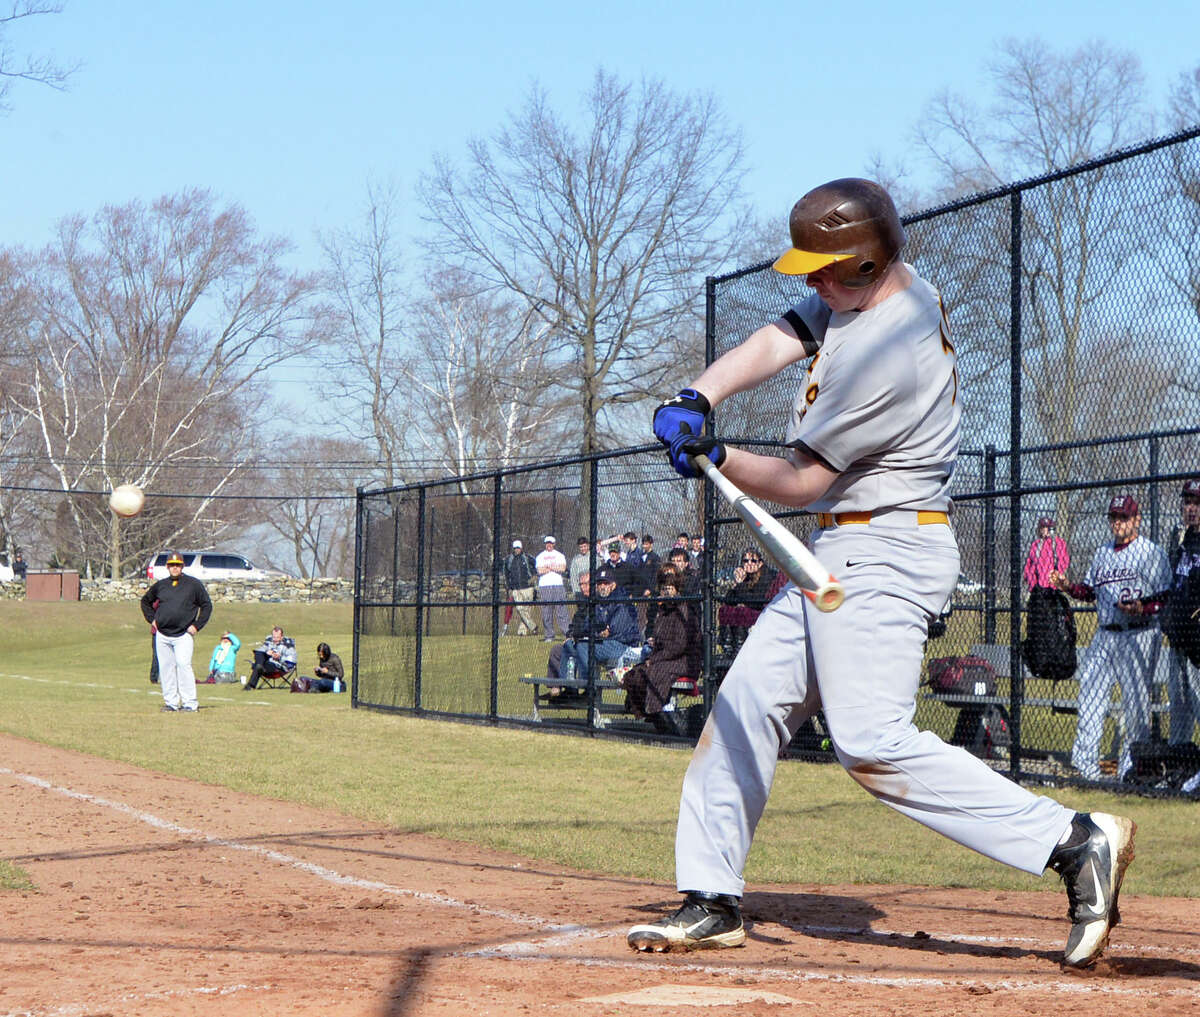 Brunswick's Ryan Popp hits a three-run home run in the bottom of the 3rd inning in the high school baseball game between Brunswick School and Hopkins School at Brunswick School in Greenwich, Wednesday, April 2, 2014. Brunswick defeated Hopkins, 8-2, with Brunswick's Bradley Wilpon getting the win.